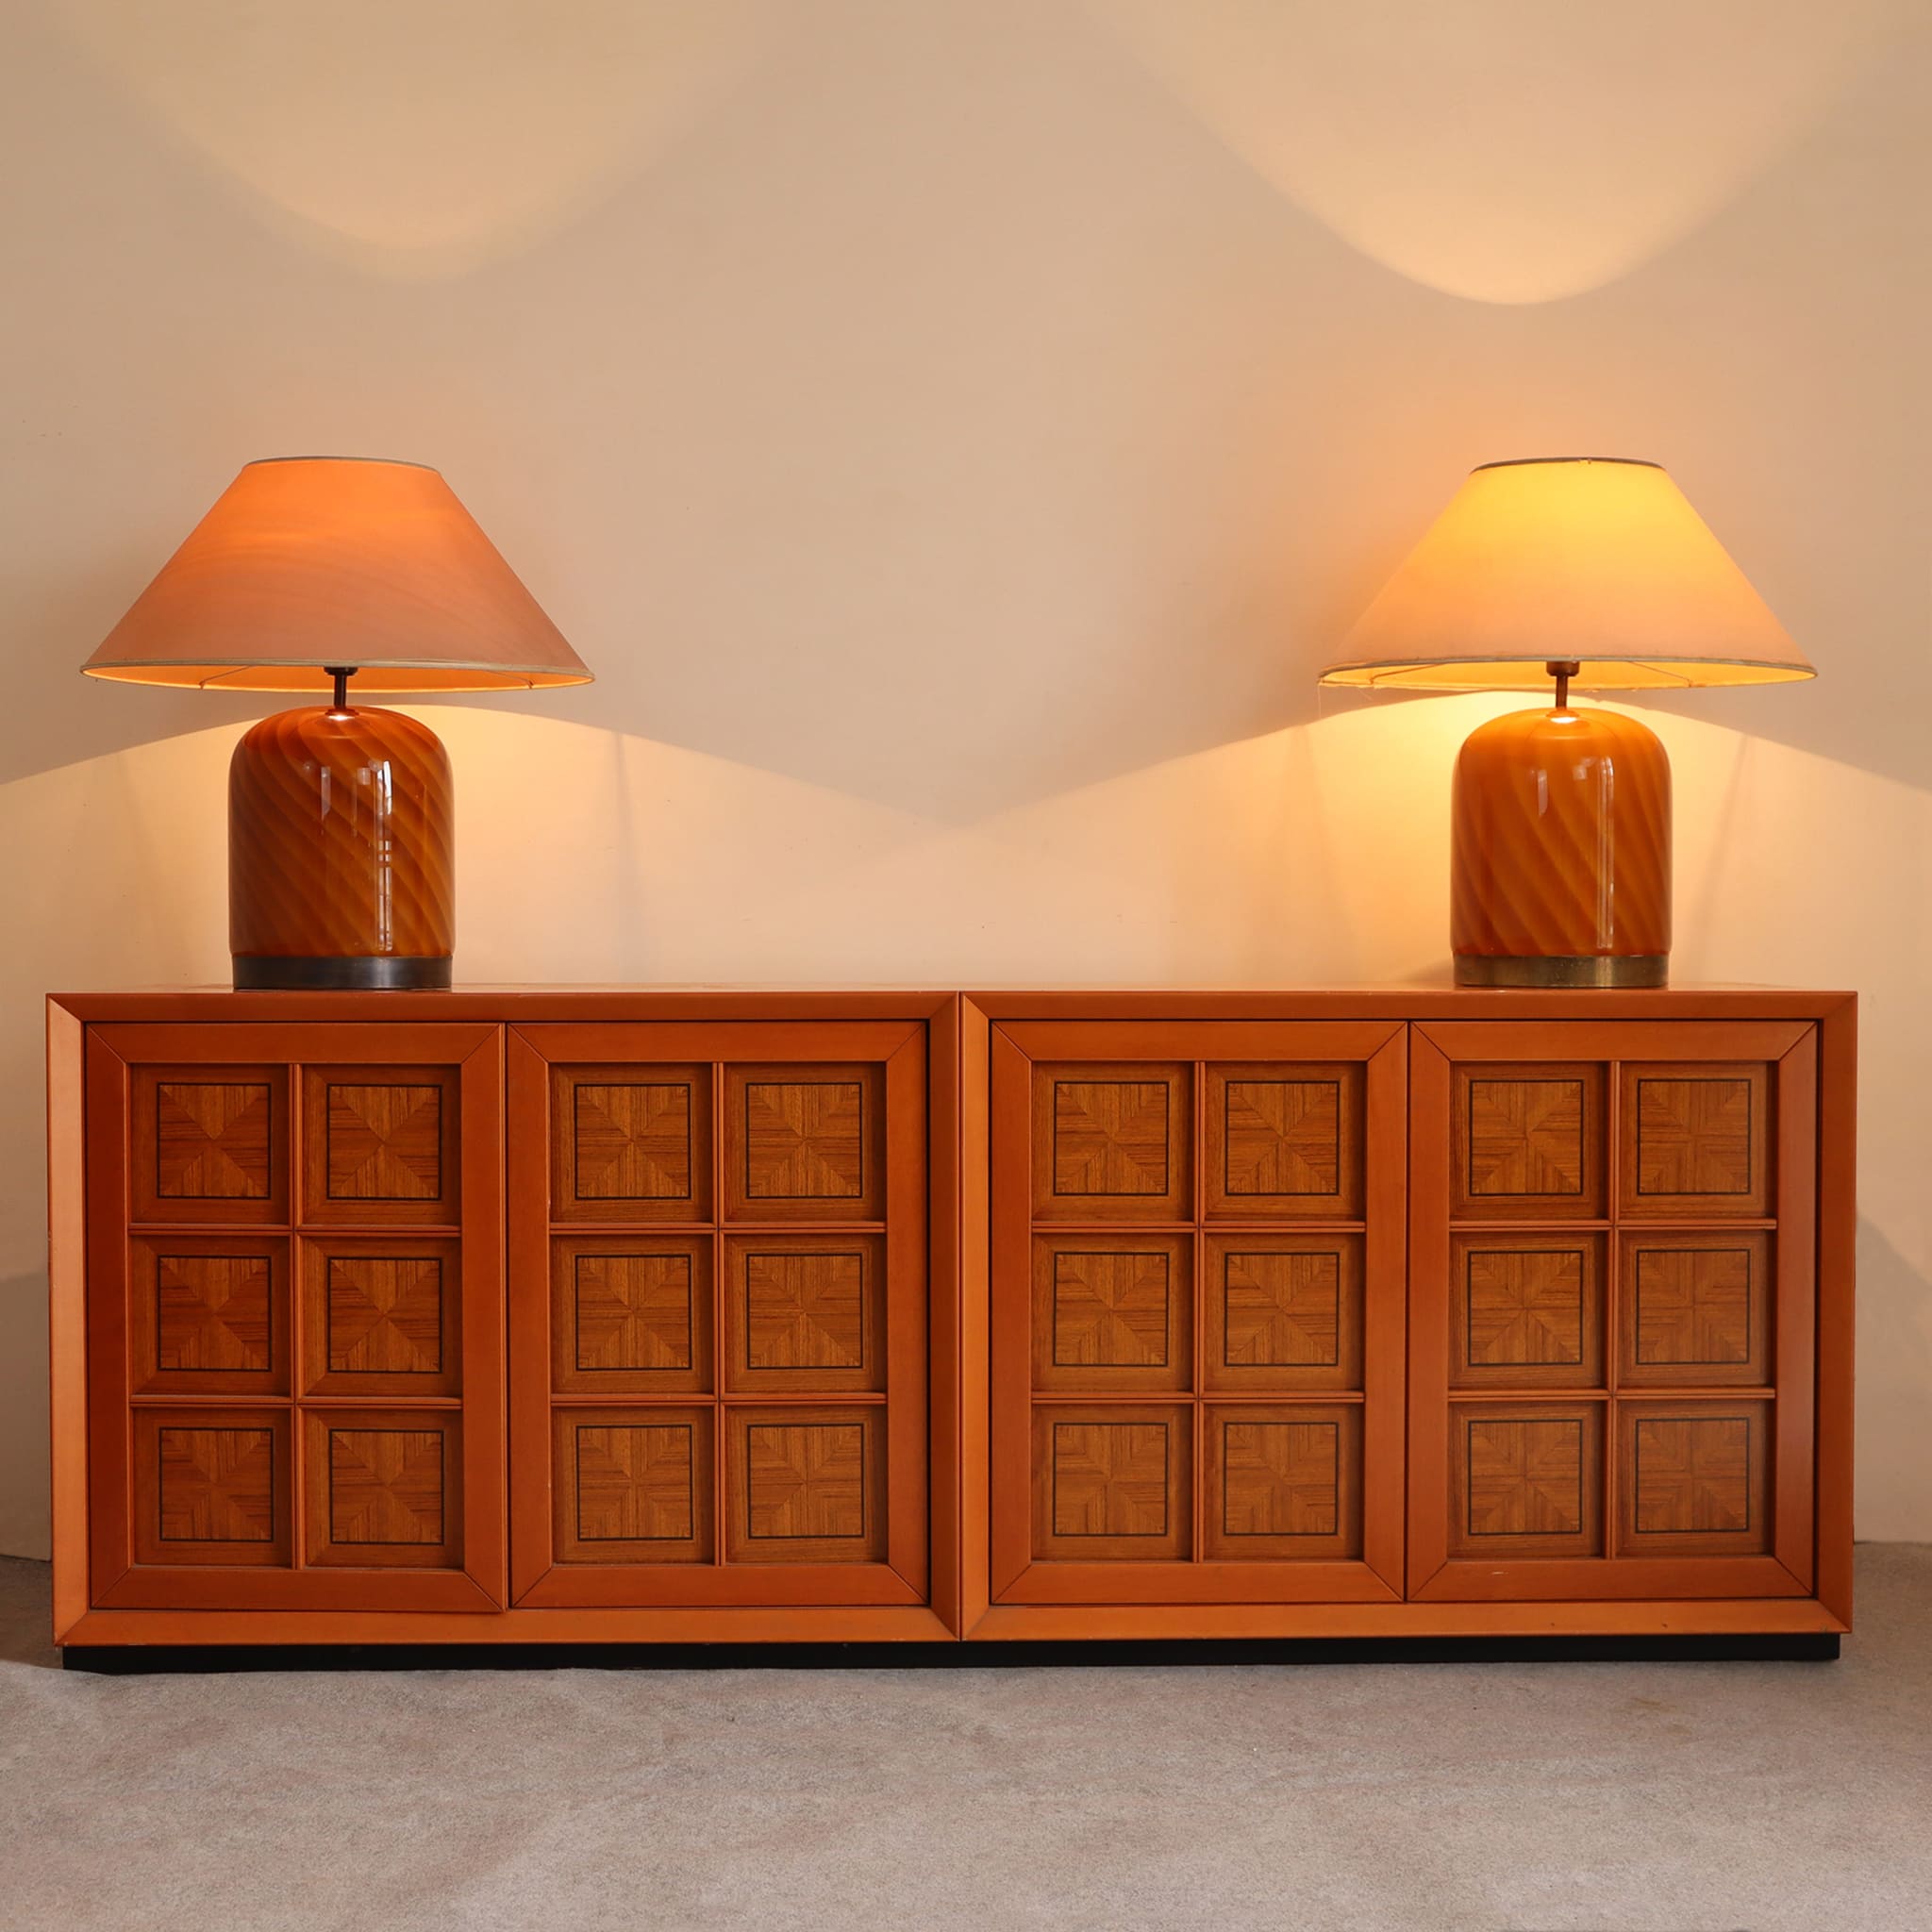 visionidepoca-modern-art-couple-sideboard-70s-fox-hunting-for-furnishing-line-4-doors-front-view